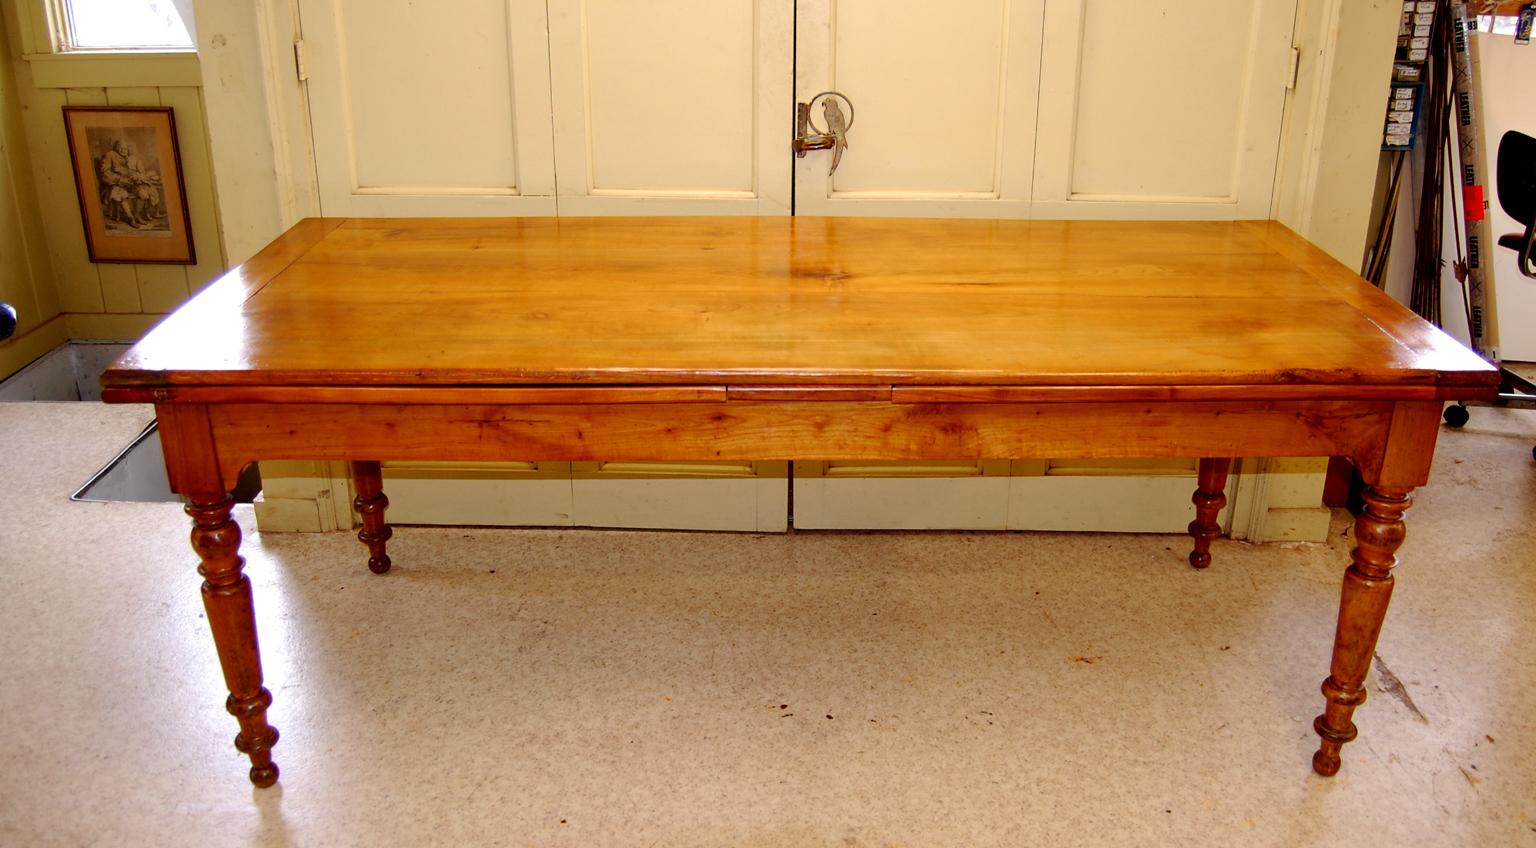 French Provincial French Mid-19th Century Farmhouse Cherry Extending Table For Sale